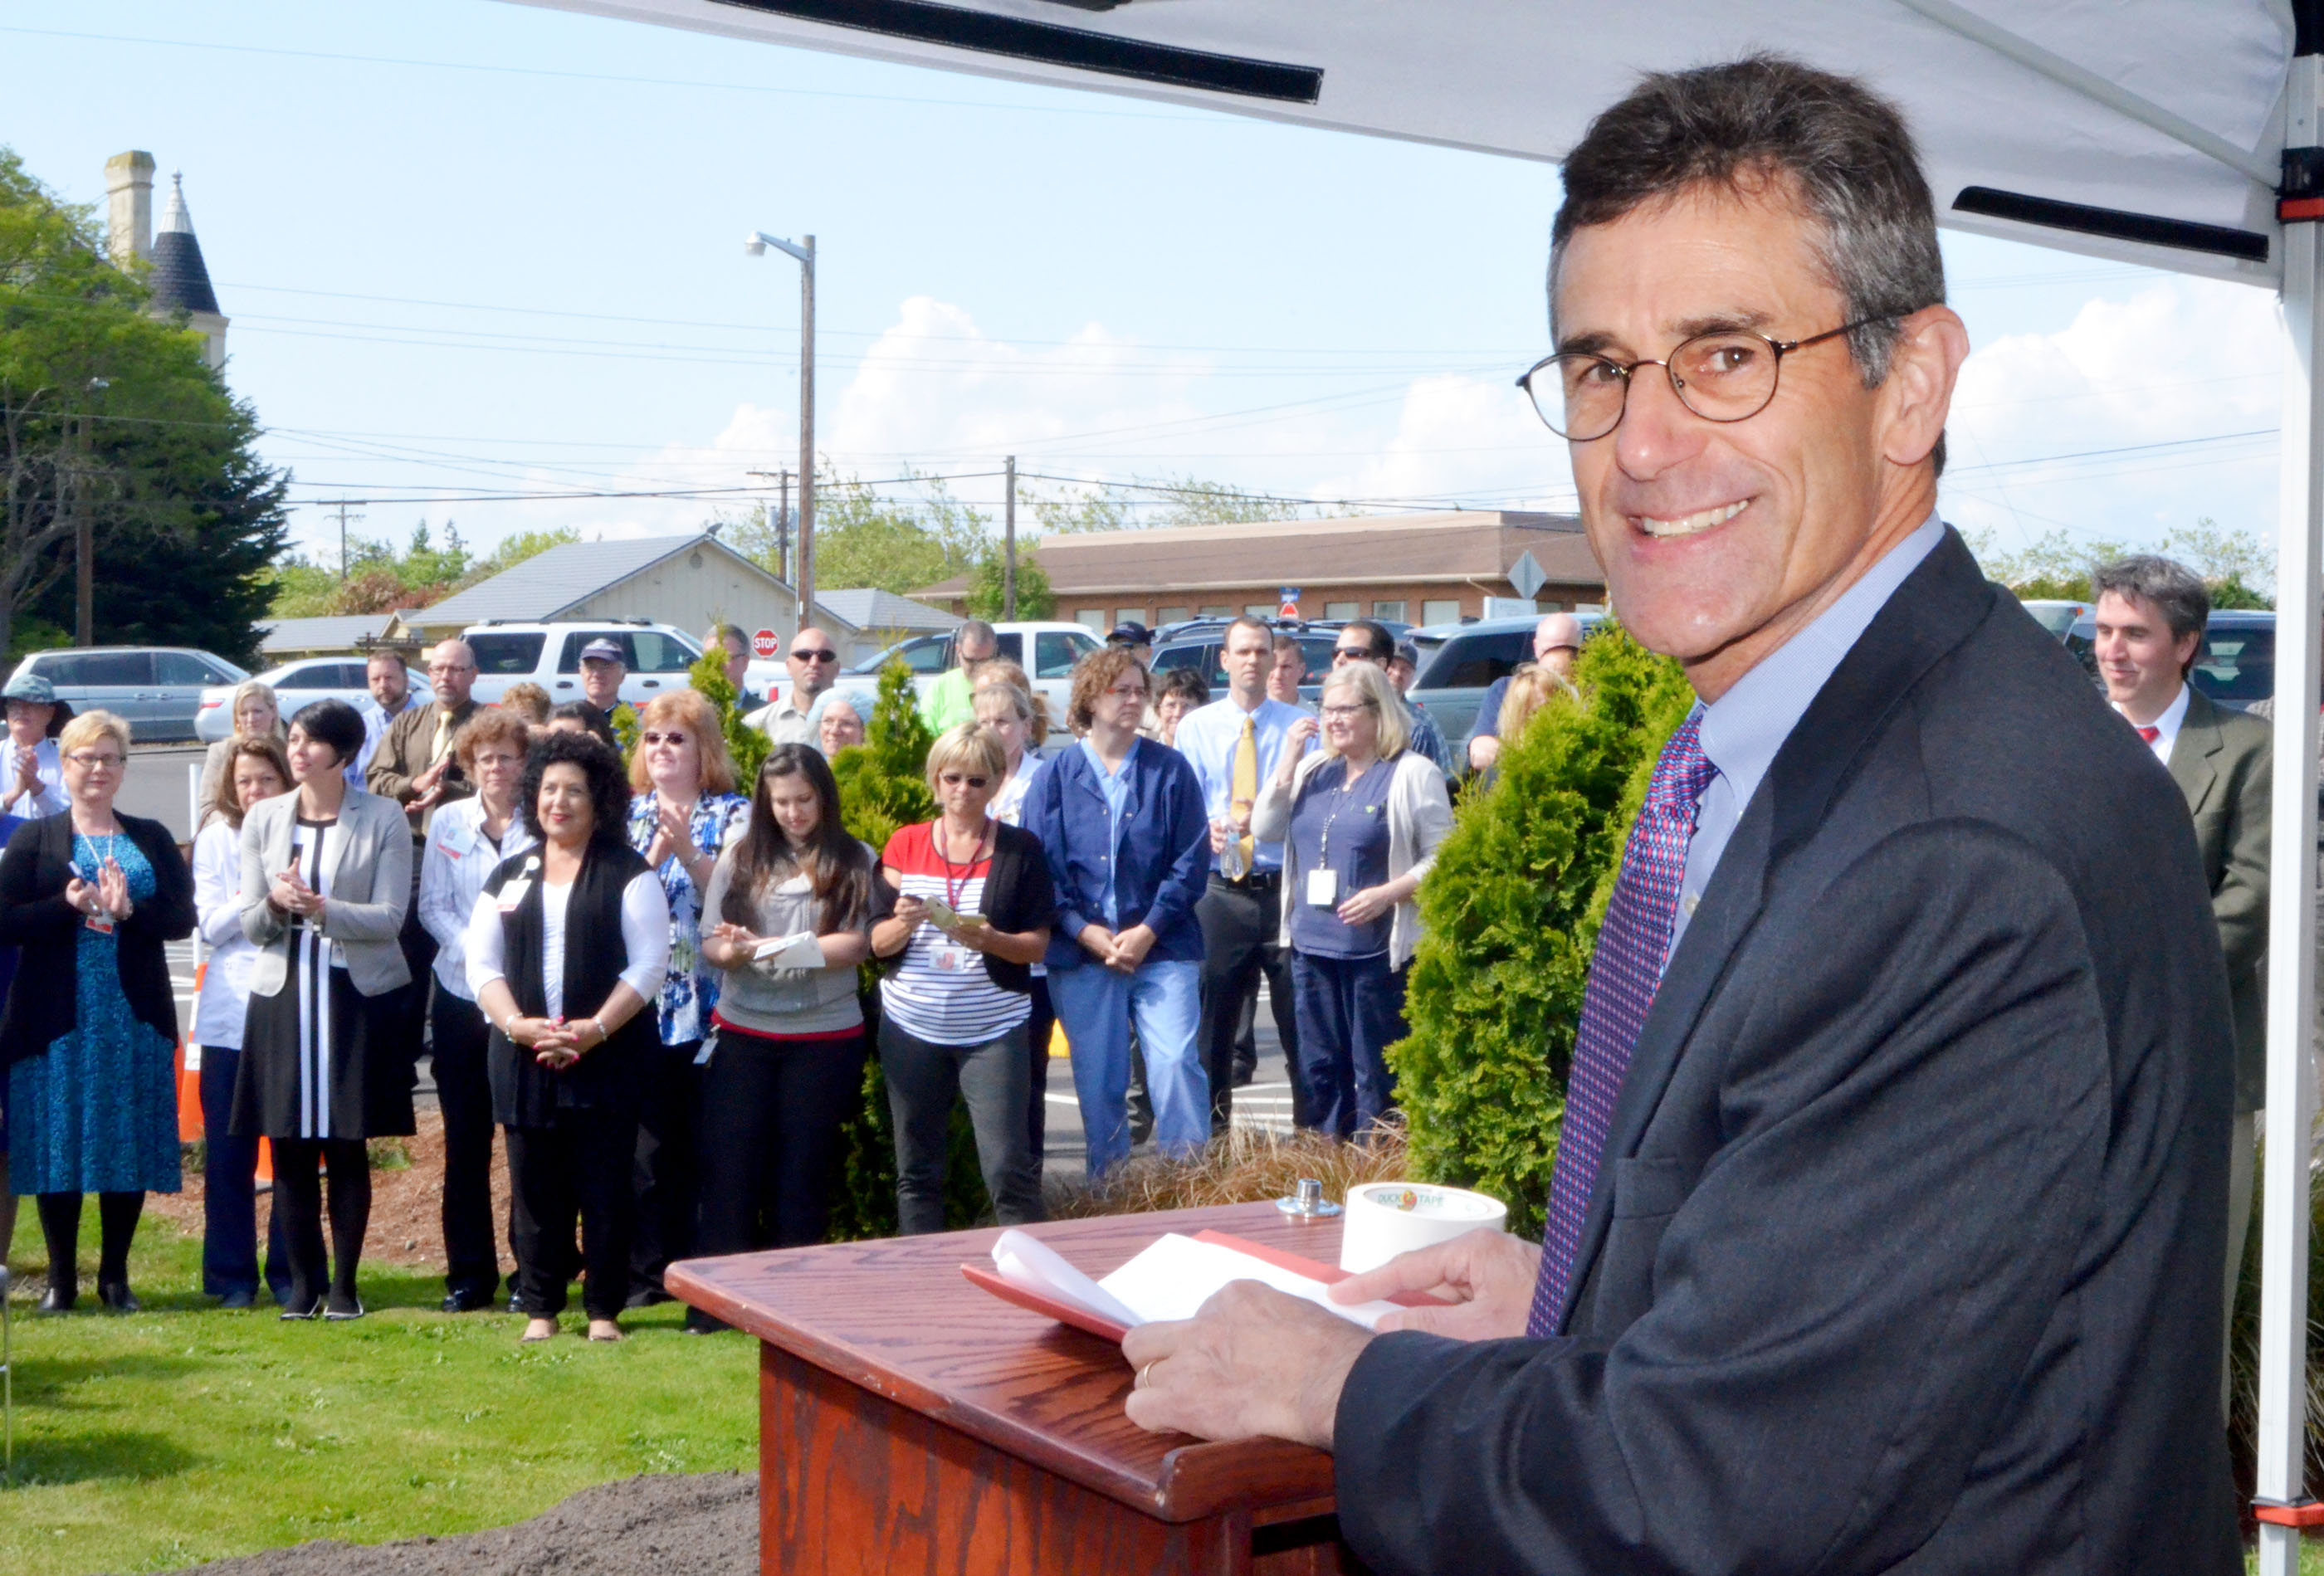 Jefferson Healthcare CEO Mike Glenn finishes his remarks at the groundbreaking of the new Emergency and Special Services Building for the Port Townsend hospital Monday. —Photo by Charlie Bermant/Peninsula Daily News ()